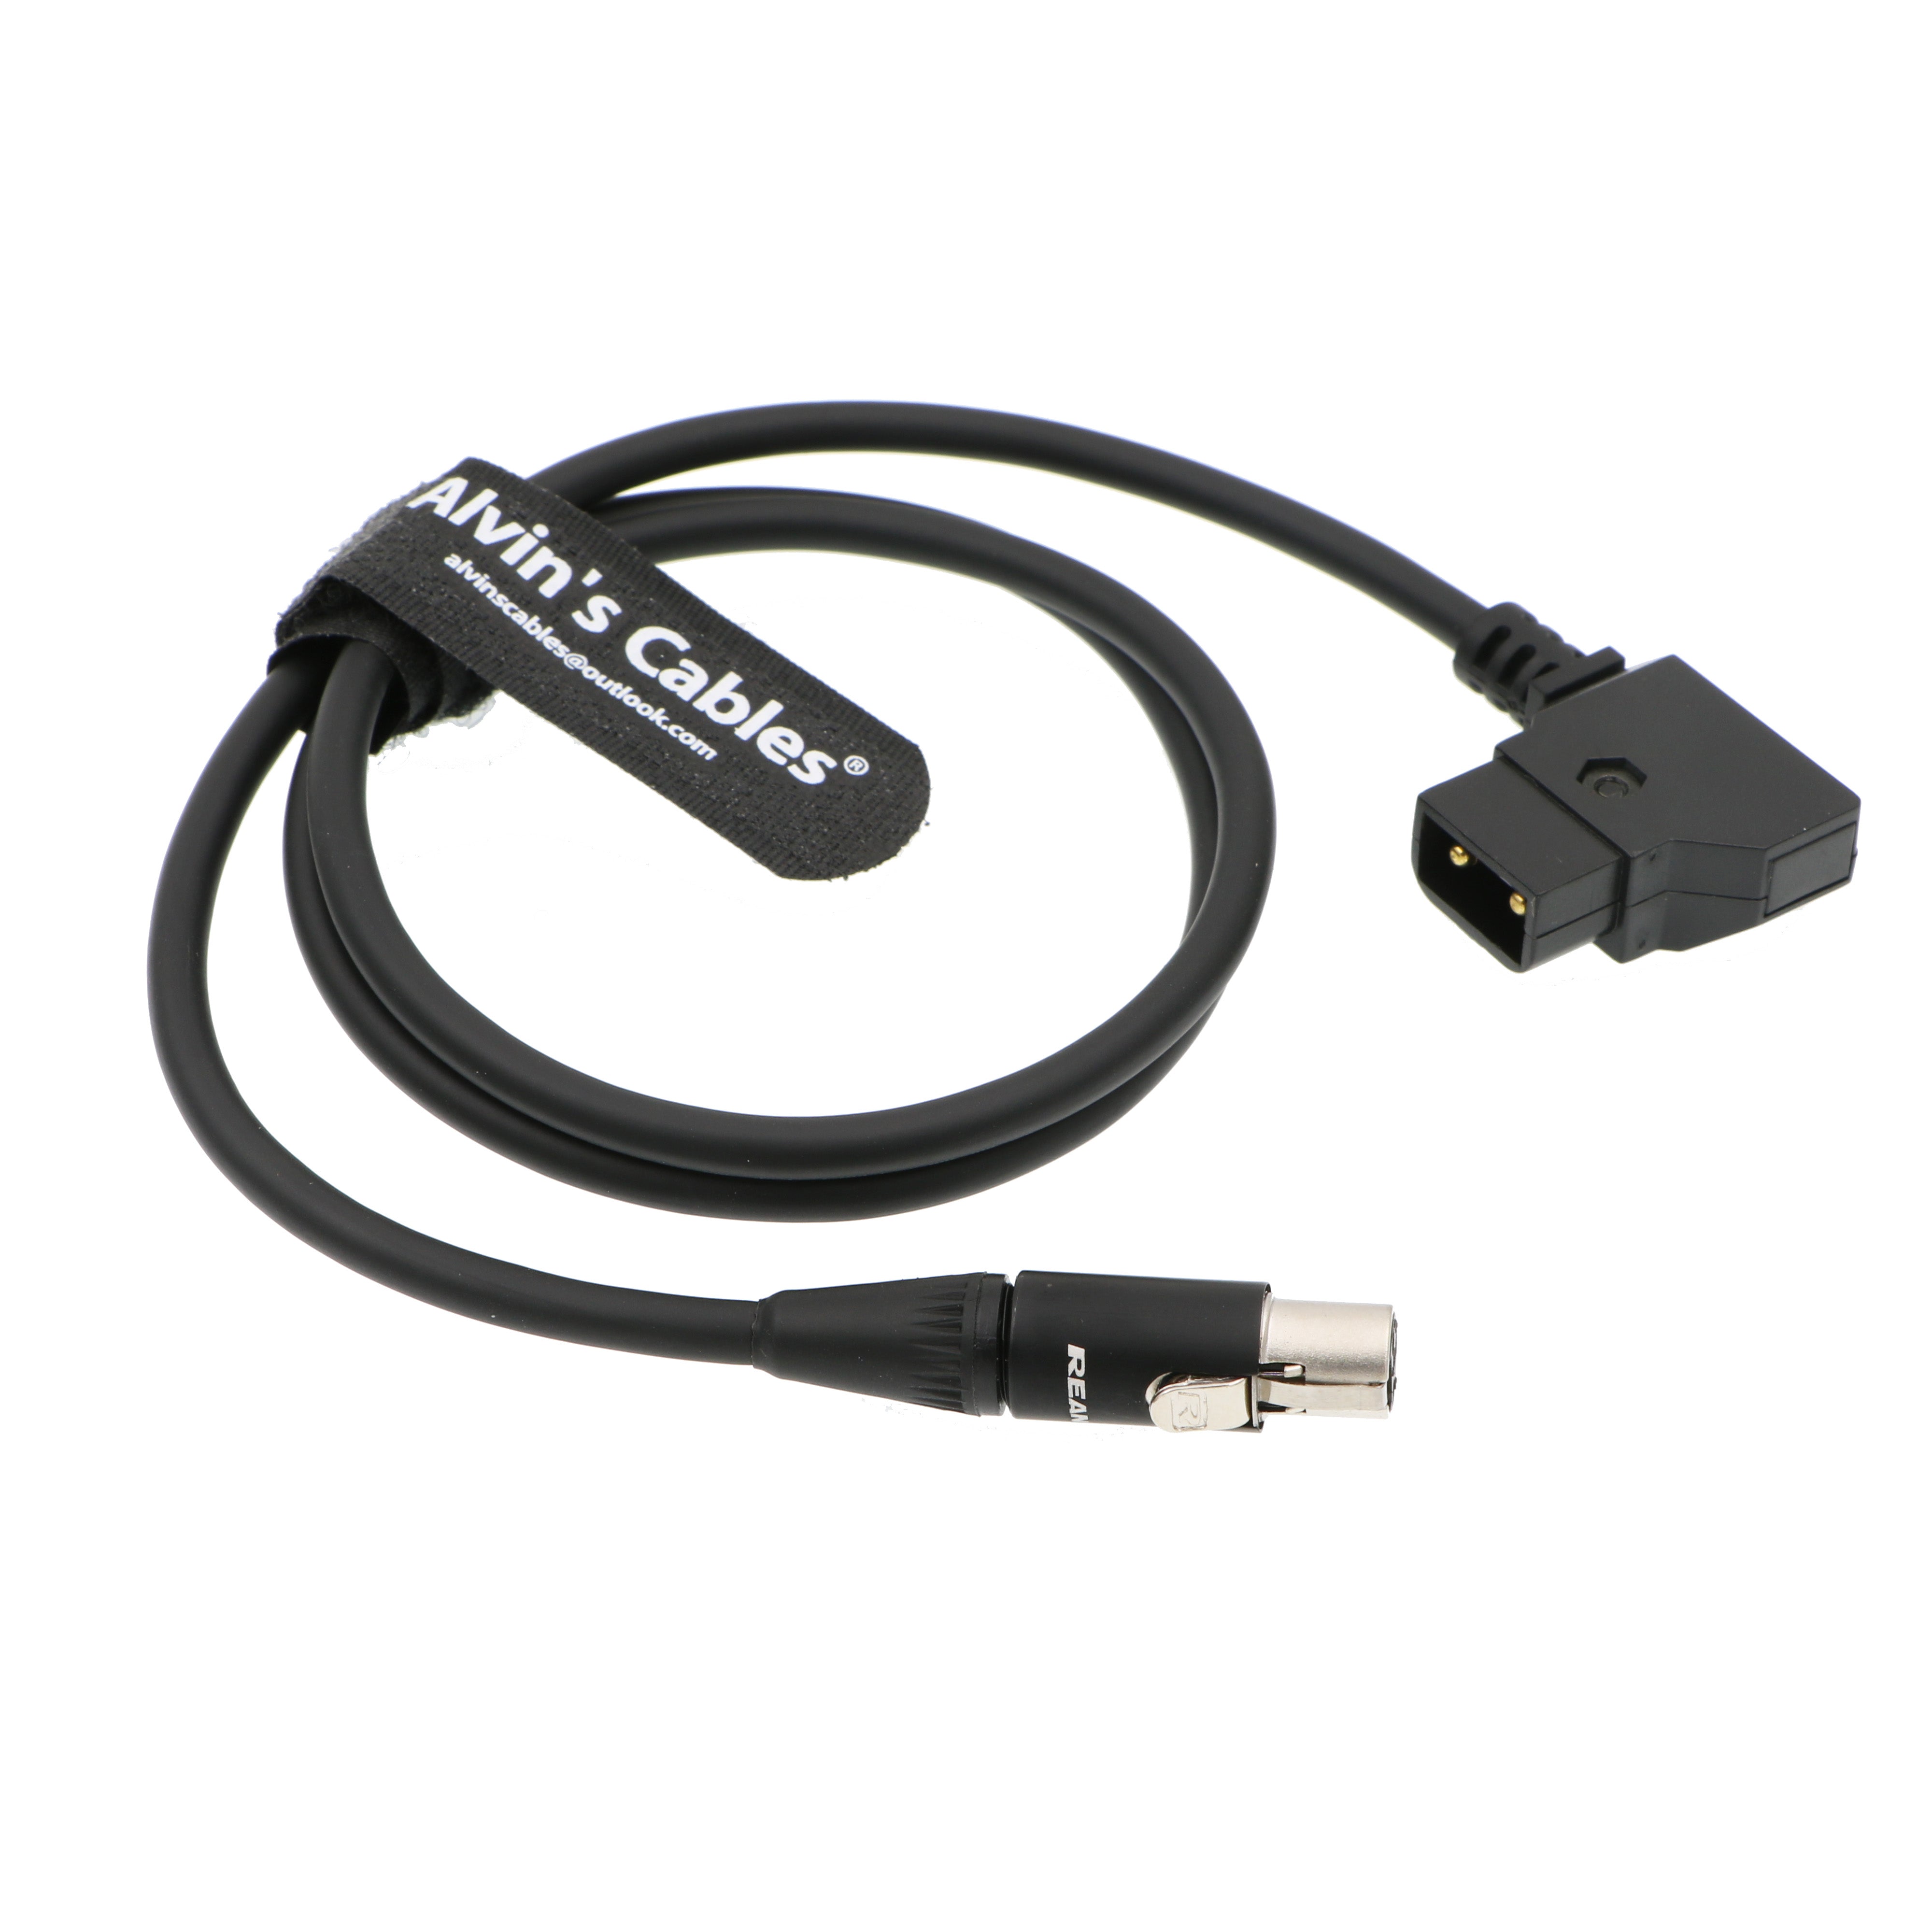 Alvin's Cables 12V TV Logic Monitor Power Cable Mini XLR 4 Pin Female to D Tap for Cameras Monitor